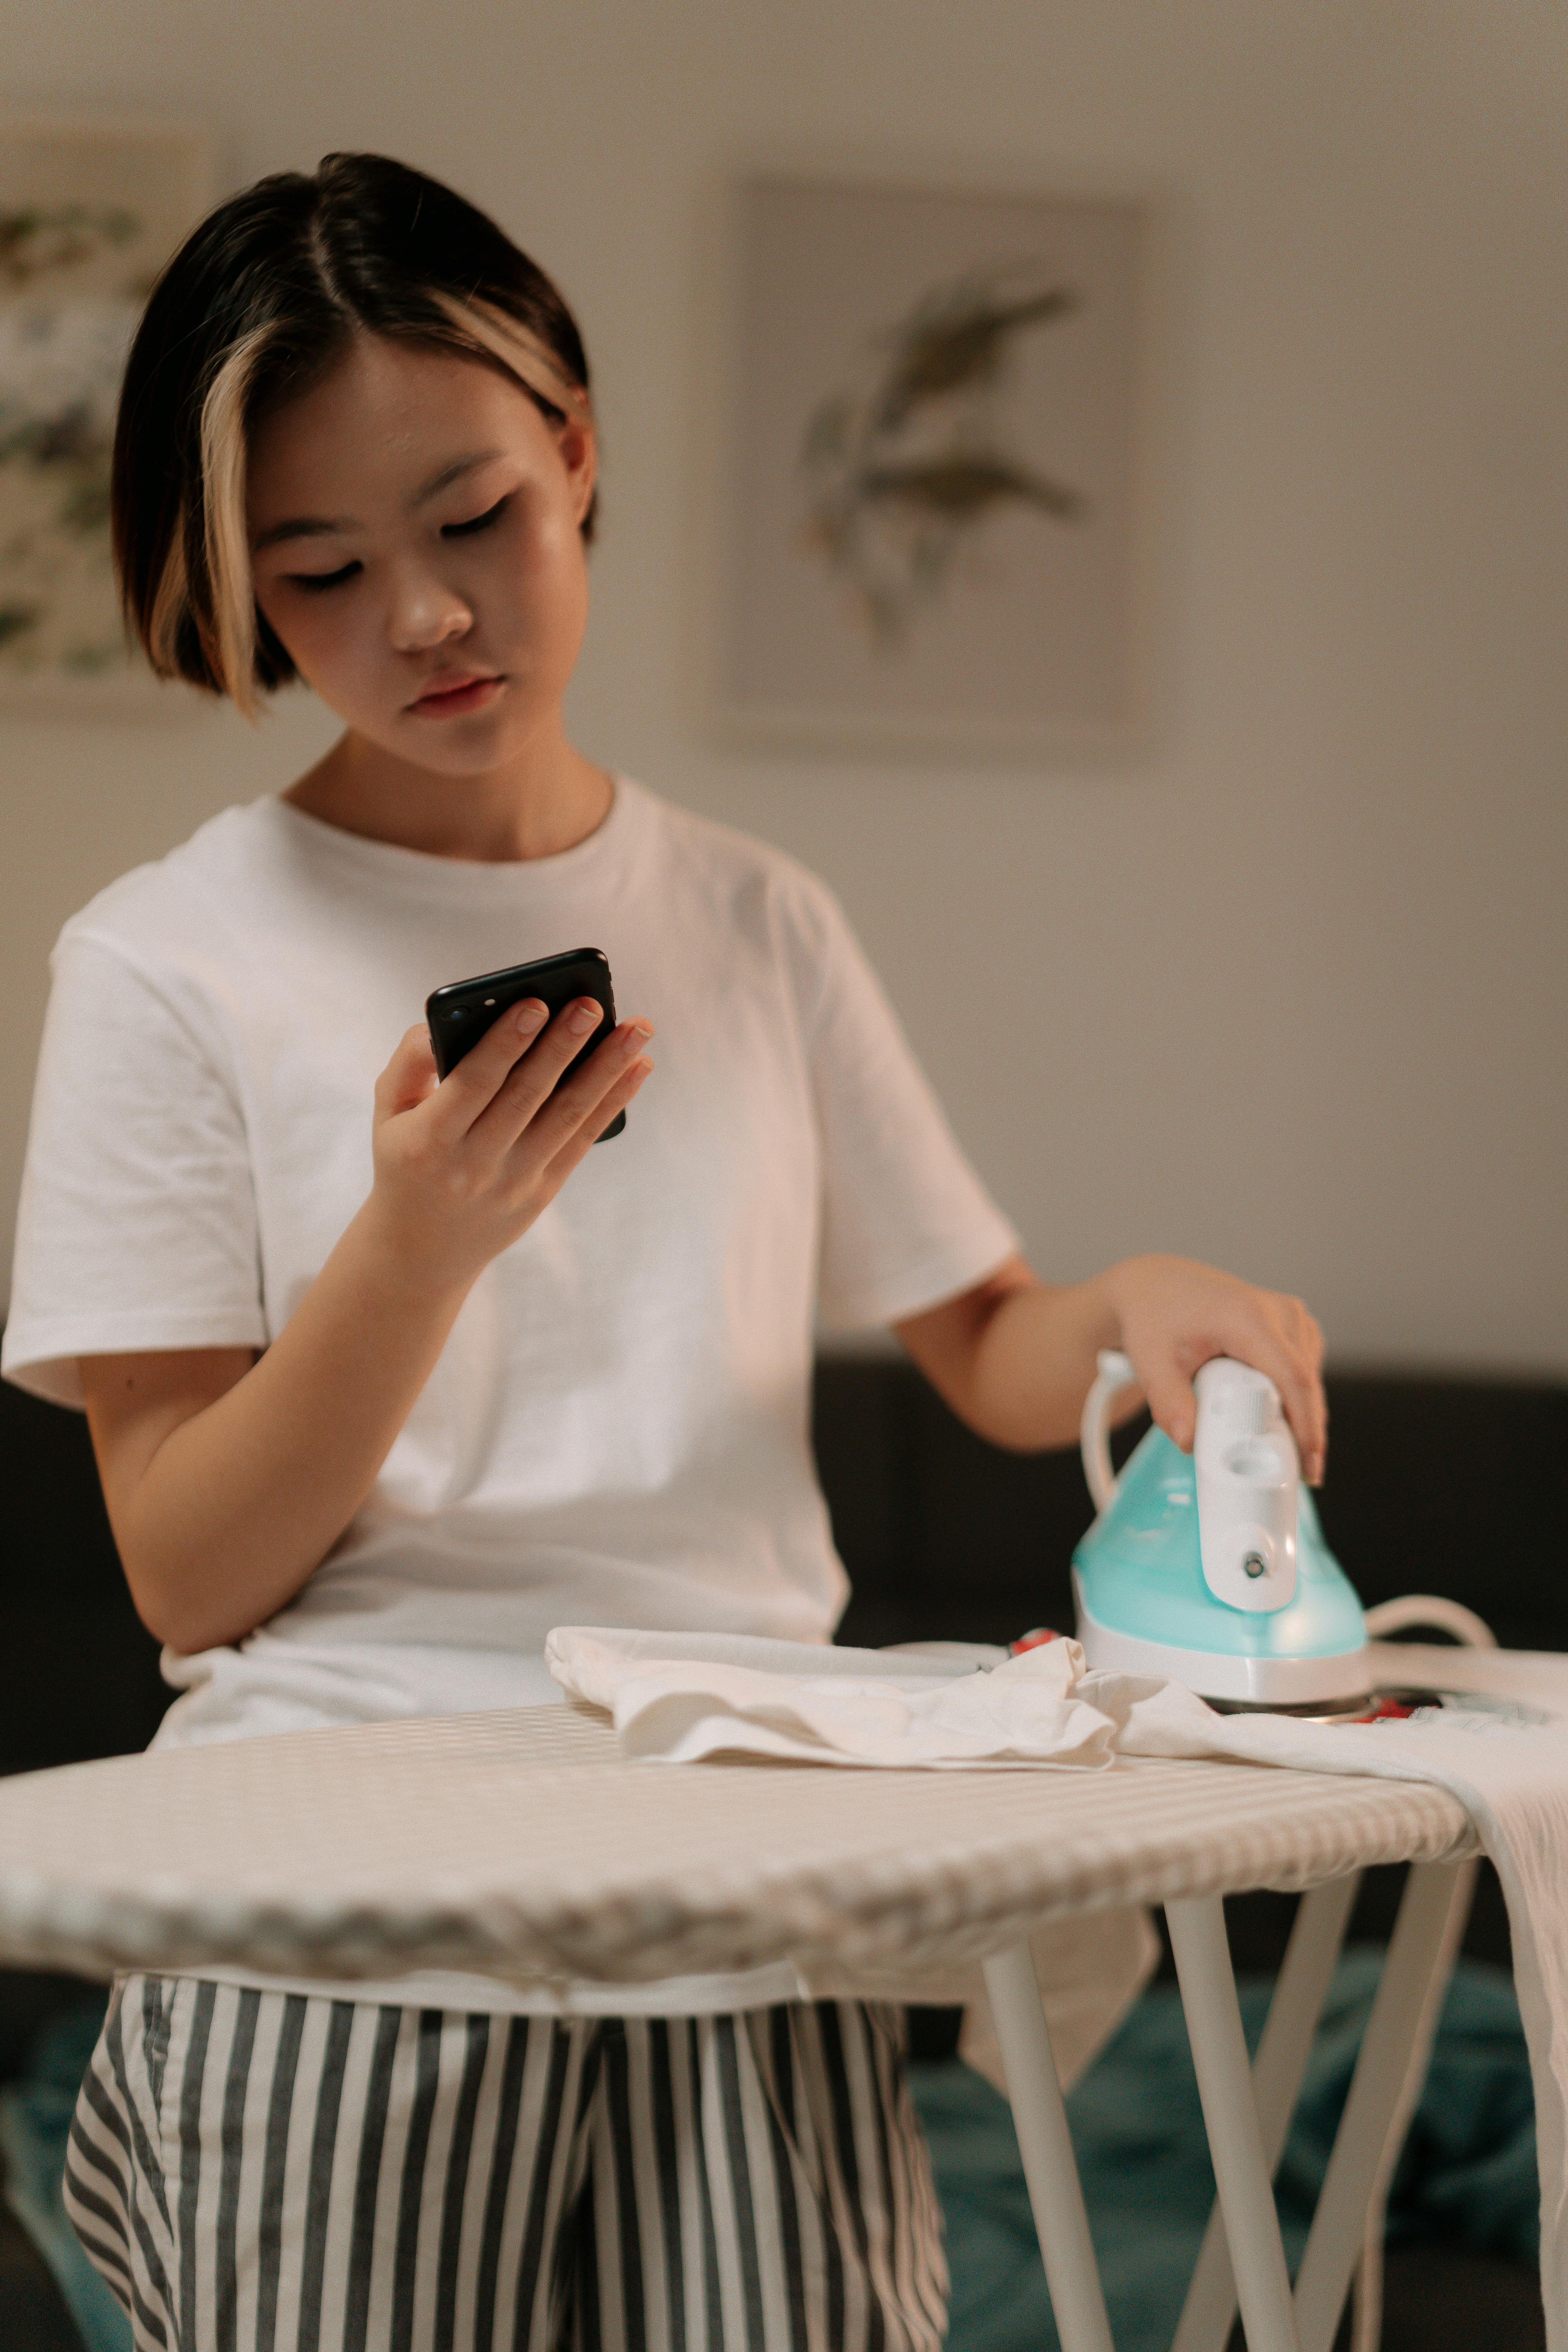 A woman ironing while holding a phone | Source:Pexels